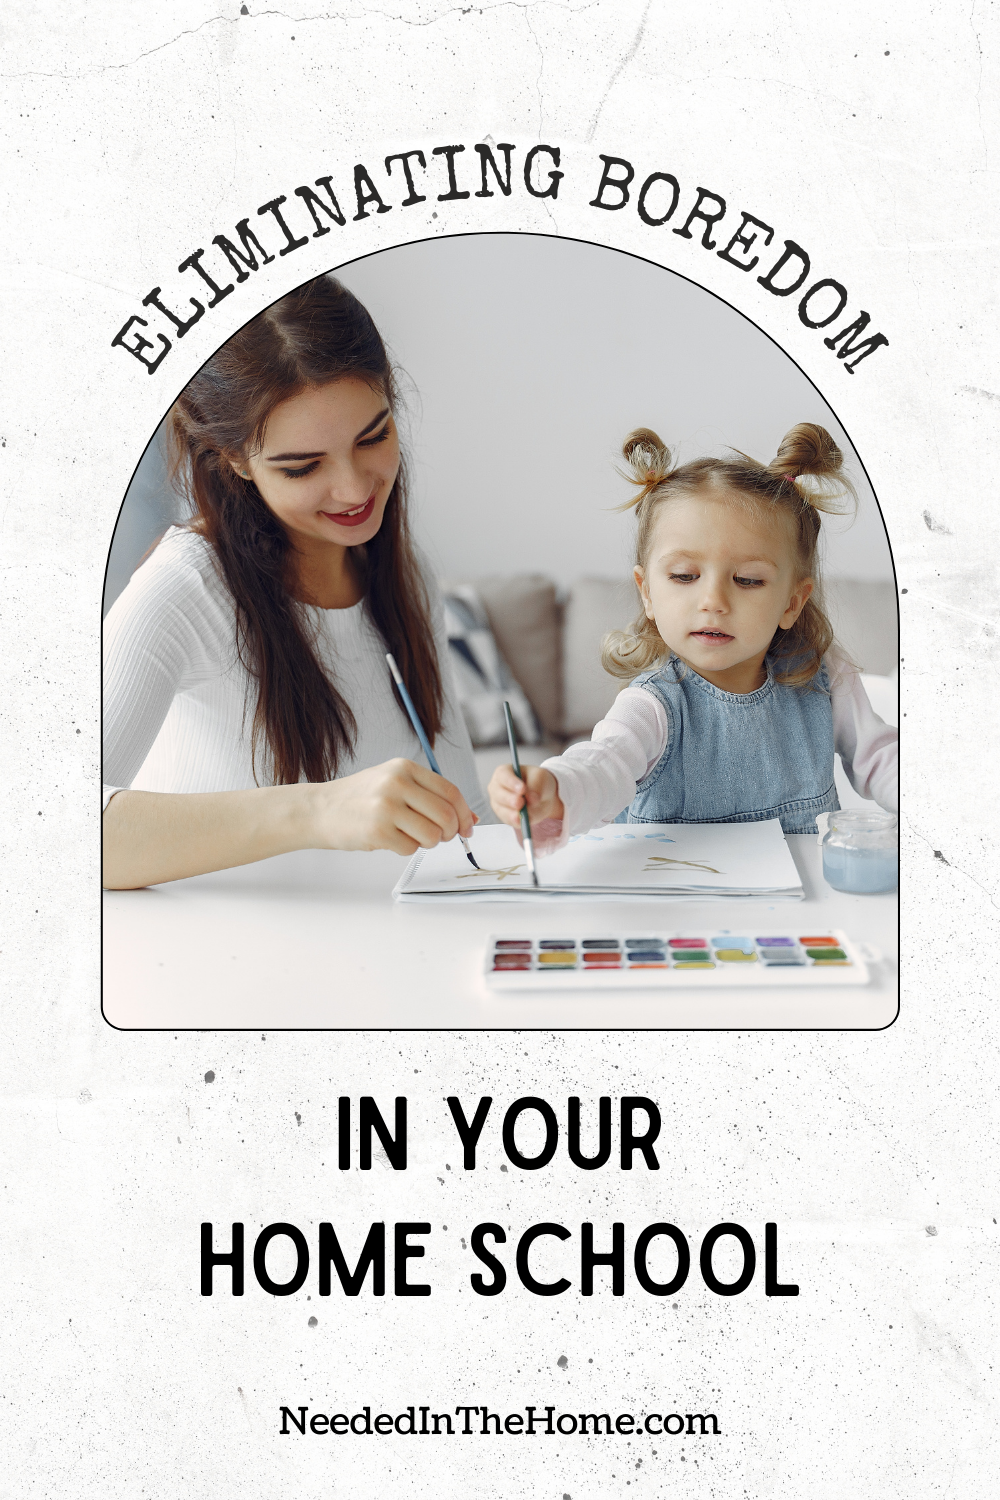 pinterest-pin-description image of mother helping her daughter paint with watercolors wording eliminating boredom in your home school by neededinthehome